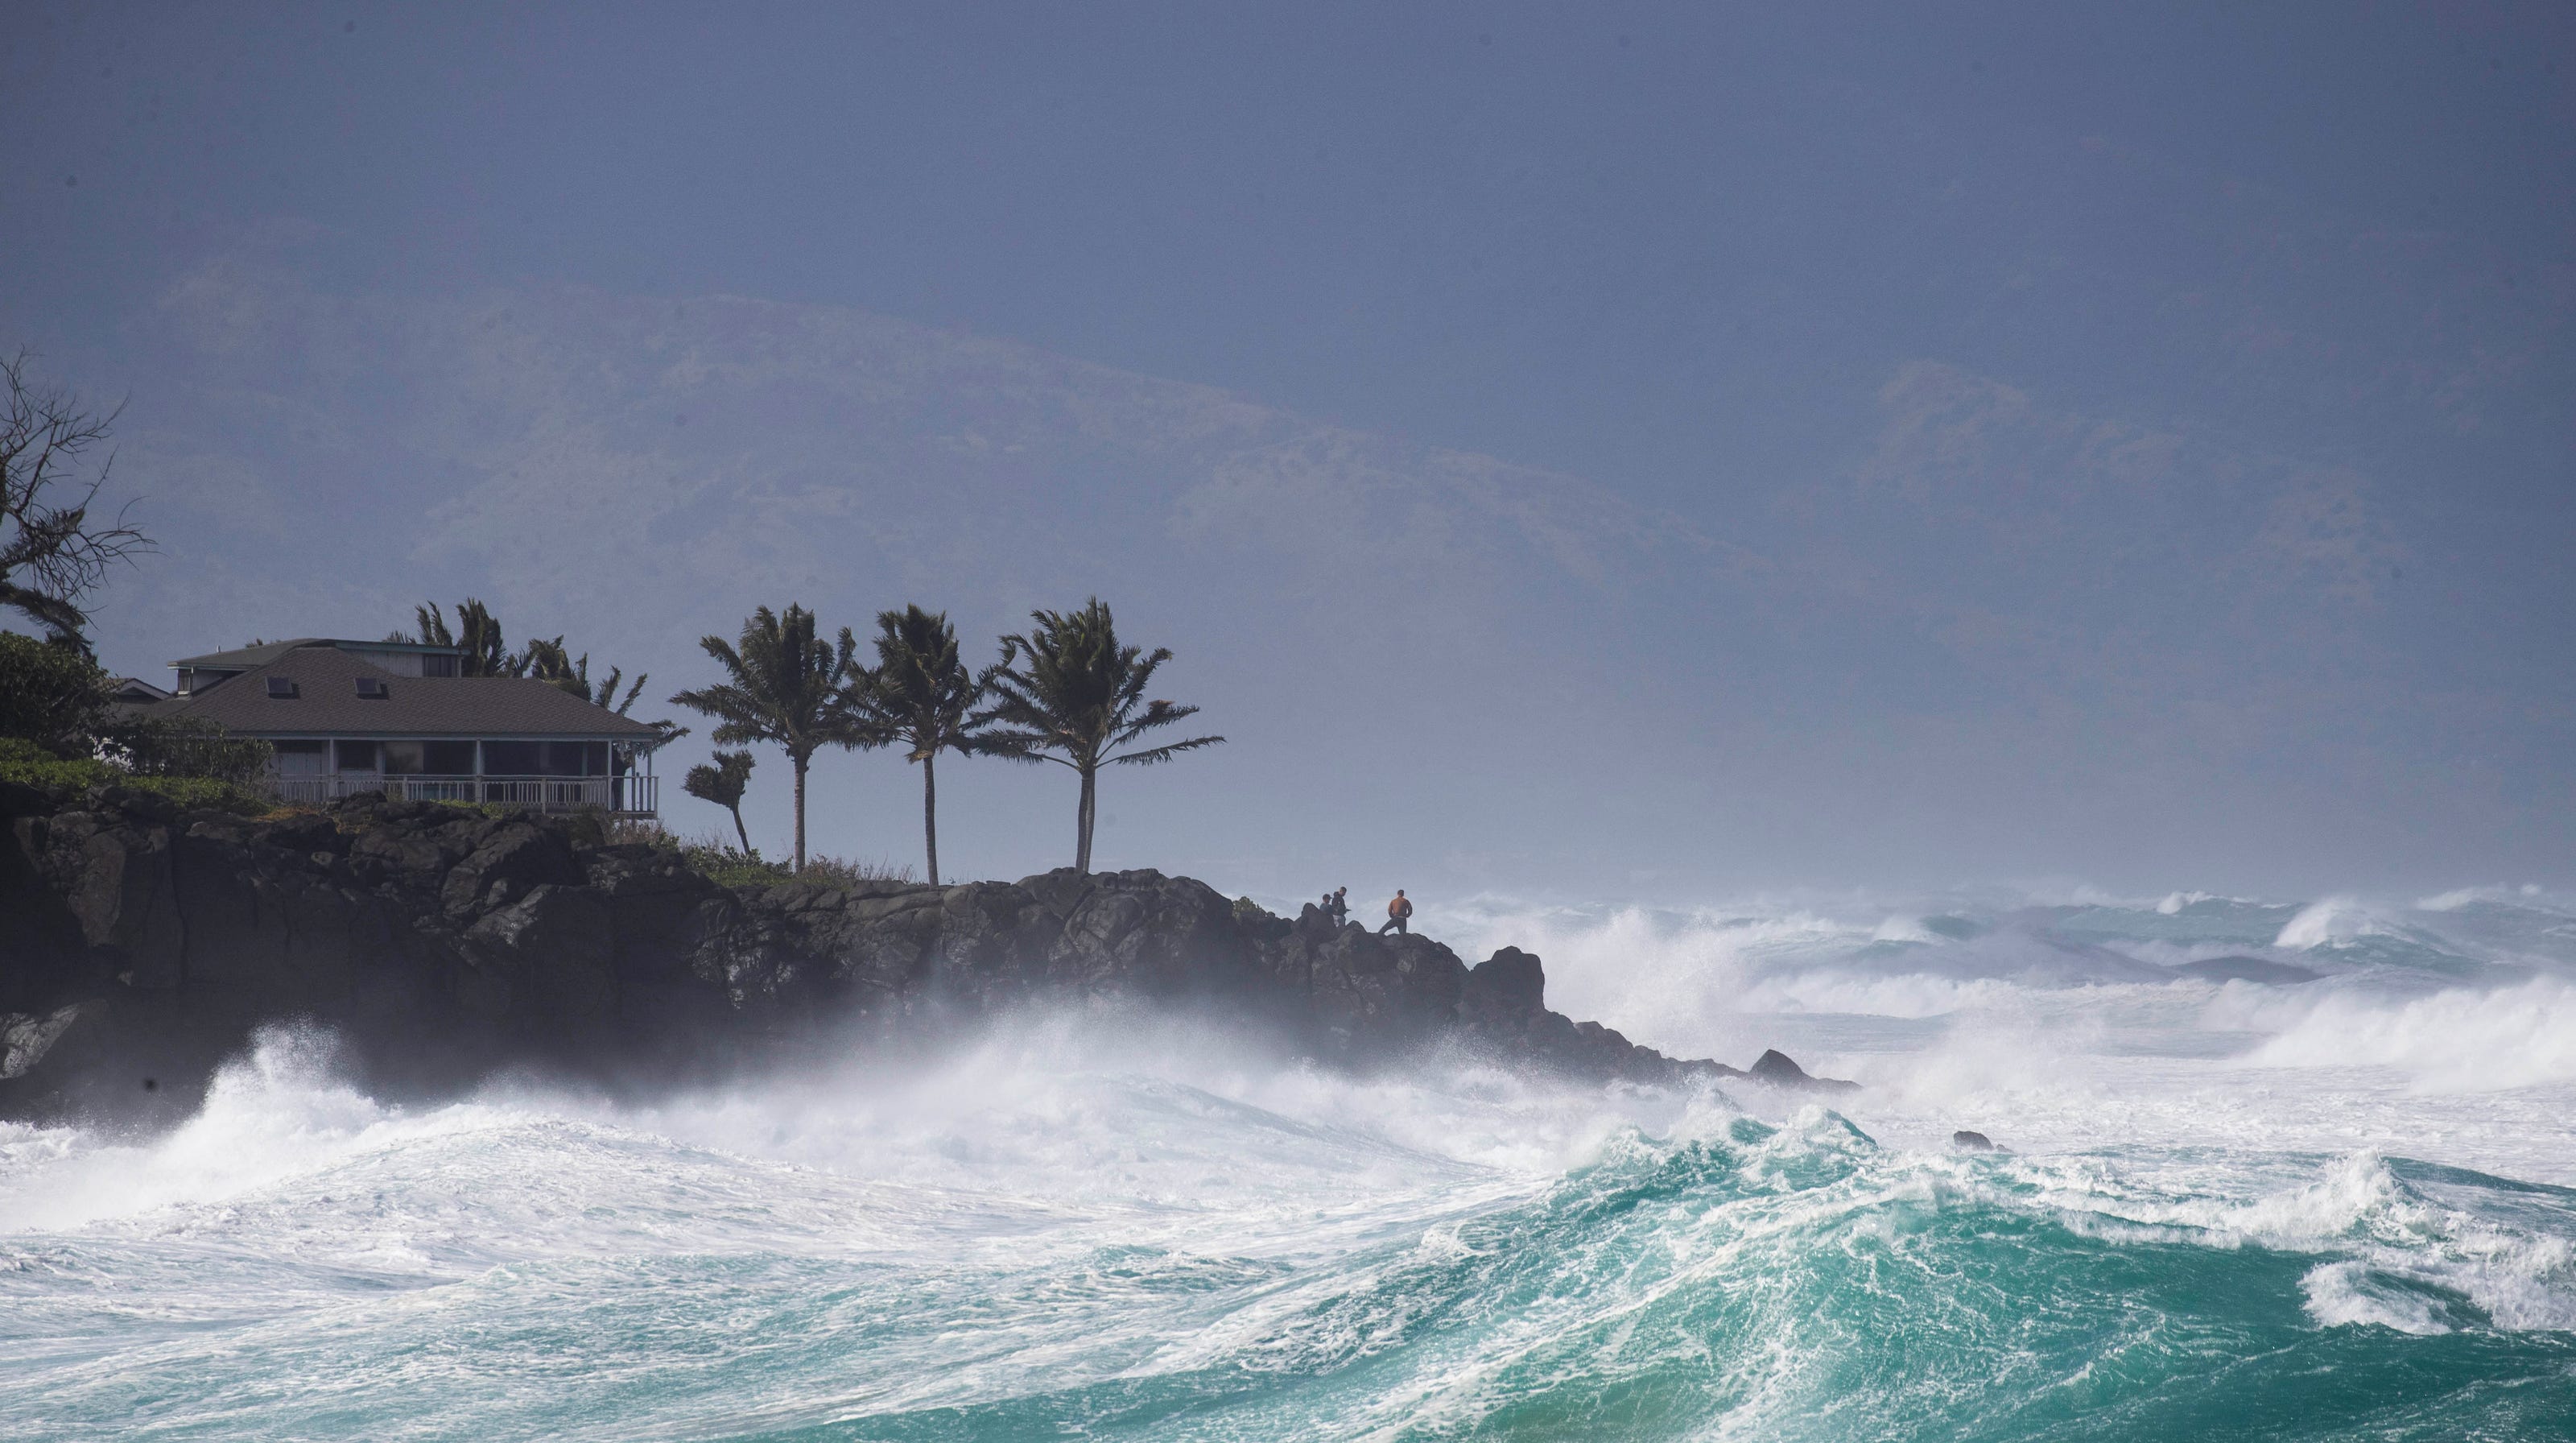 Hawaii weather is an example of climate change, experts say